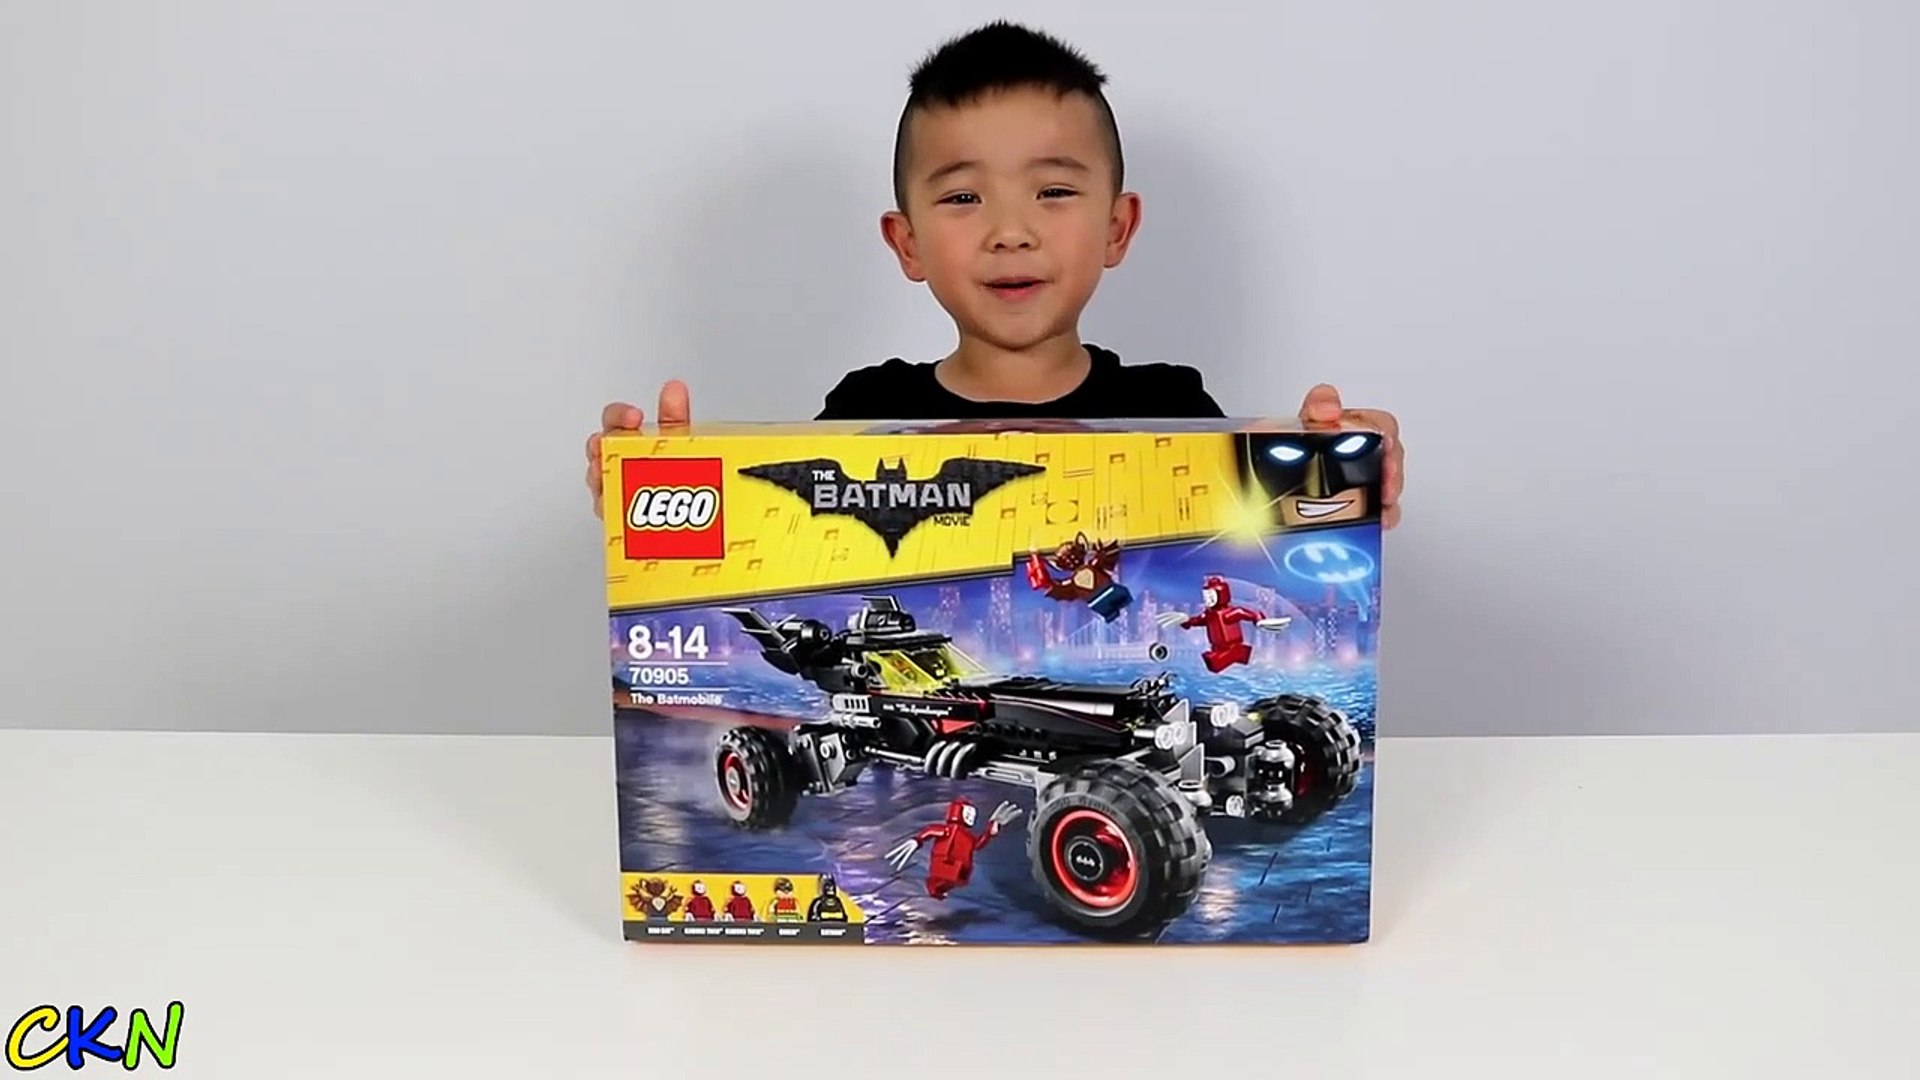 LEGO Batman Movie The Batmobile Set Toys Unboxing And Assembling Fun With Ckn  Toys-1EPKh350B - video Dailymotion